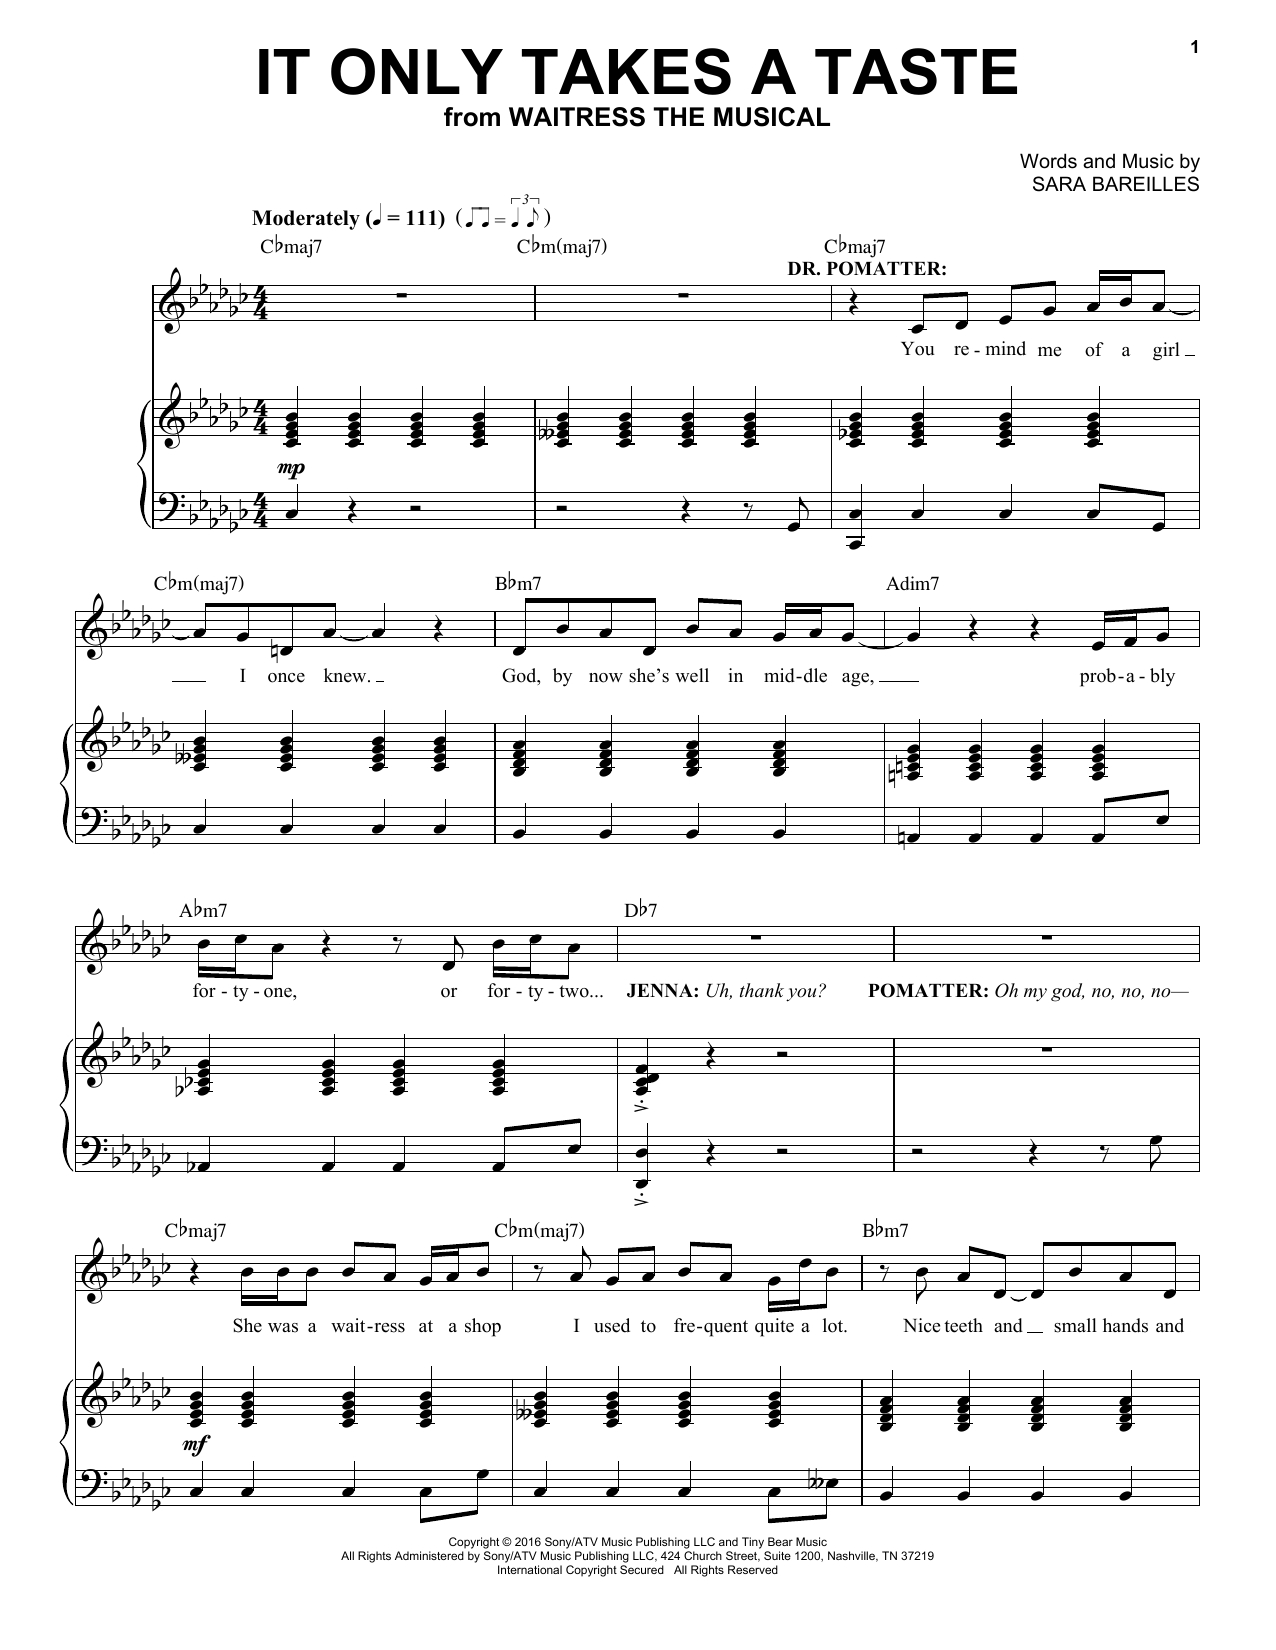 Lord I Lift Your Name On High Chords Sheet Music Digital Files To Print Licensed Musicalshow Digital